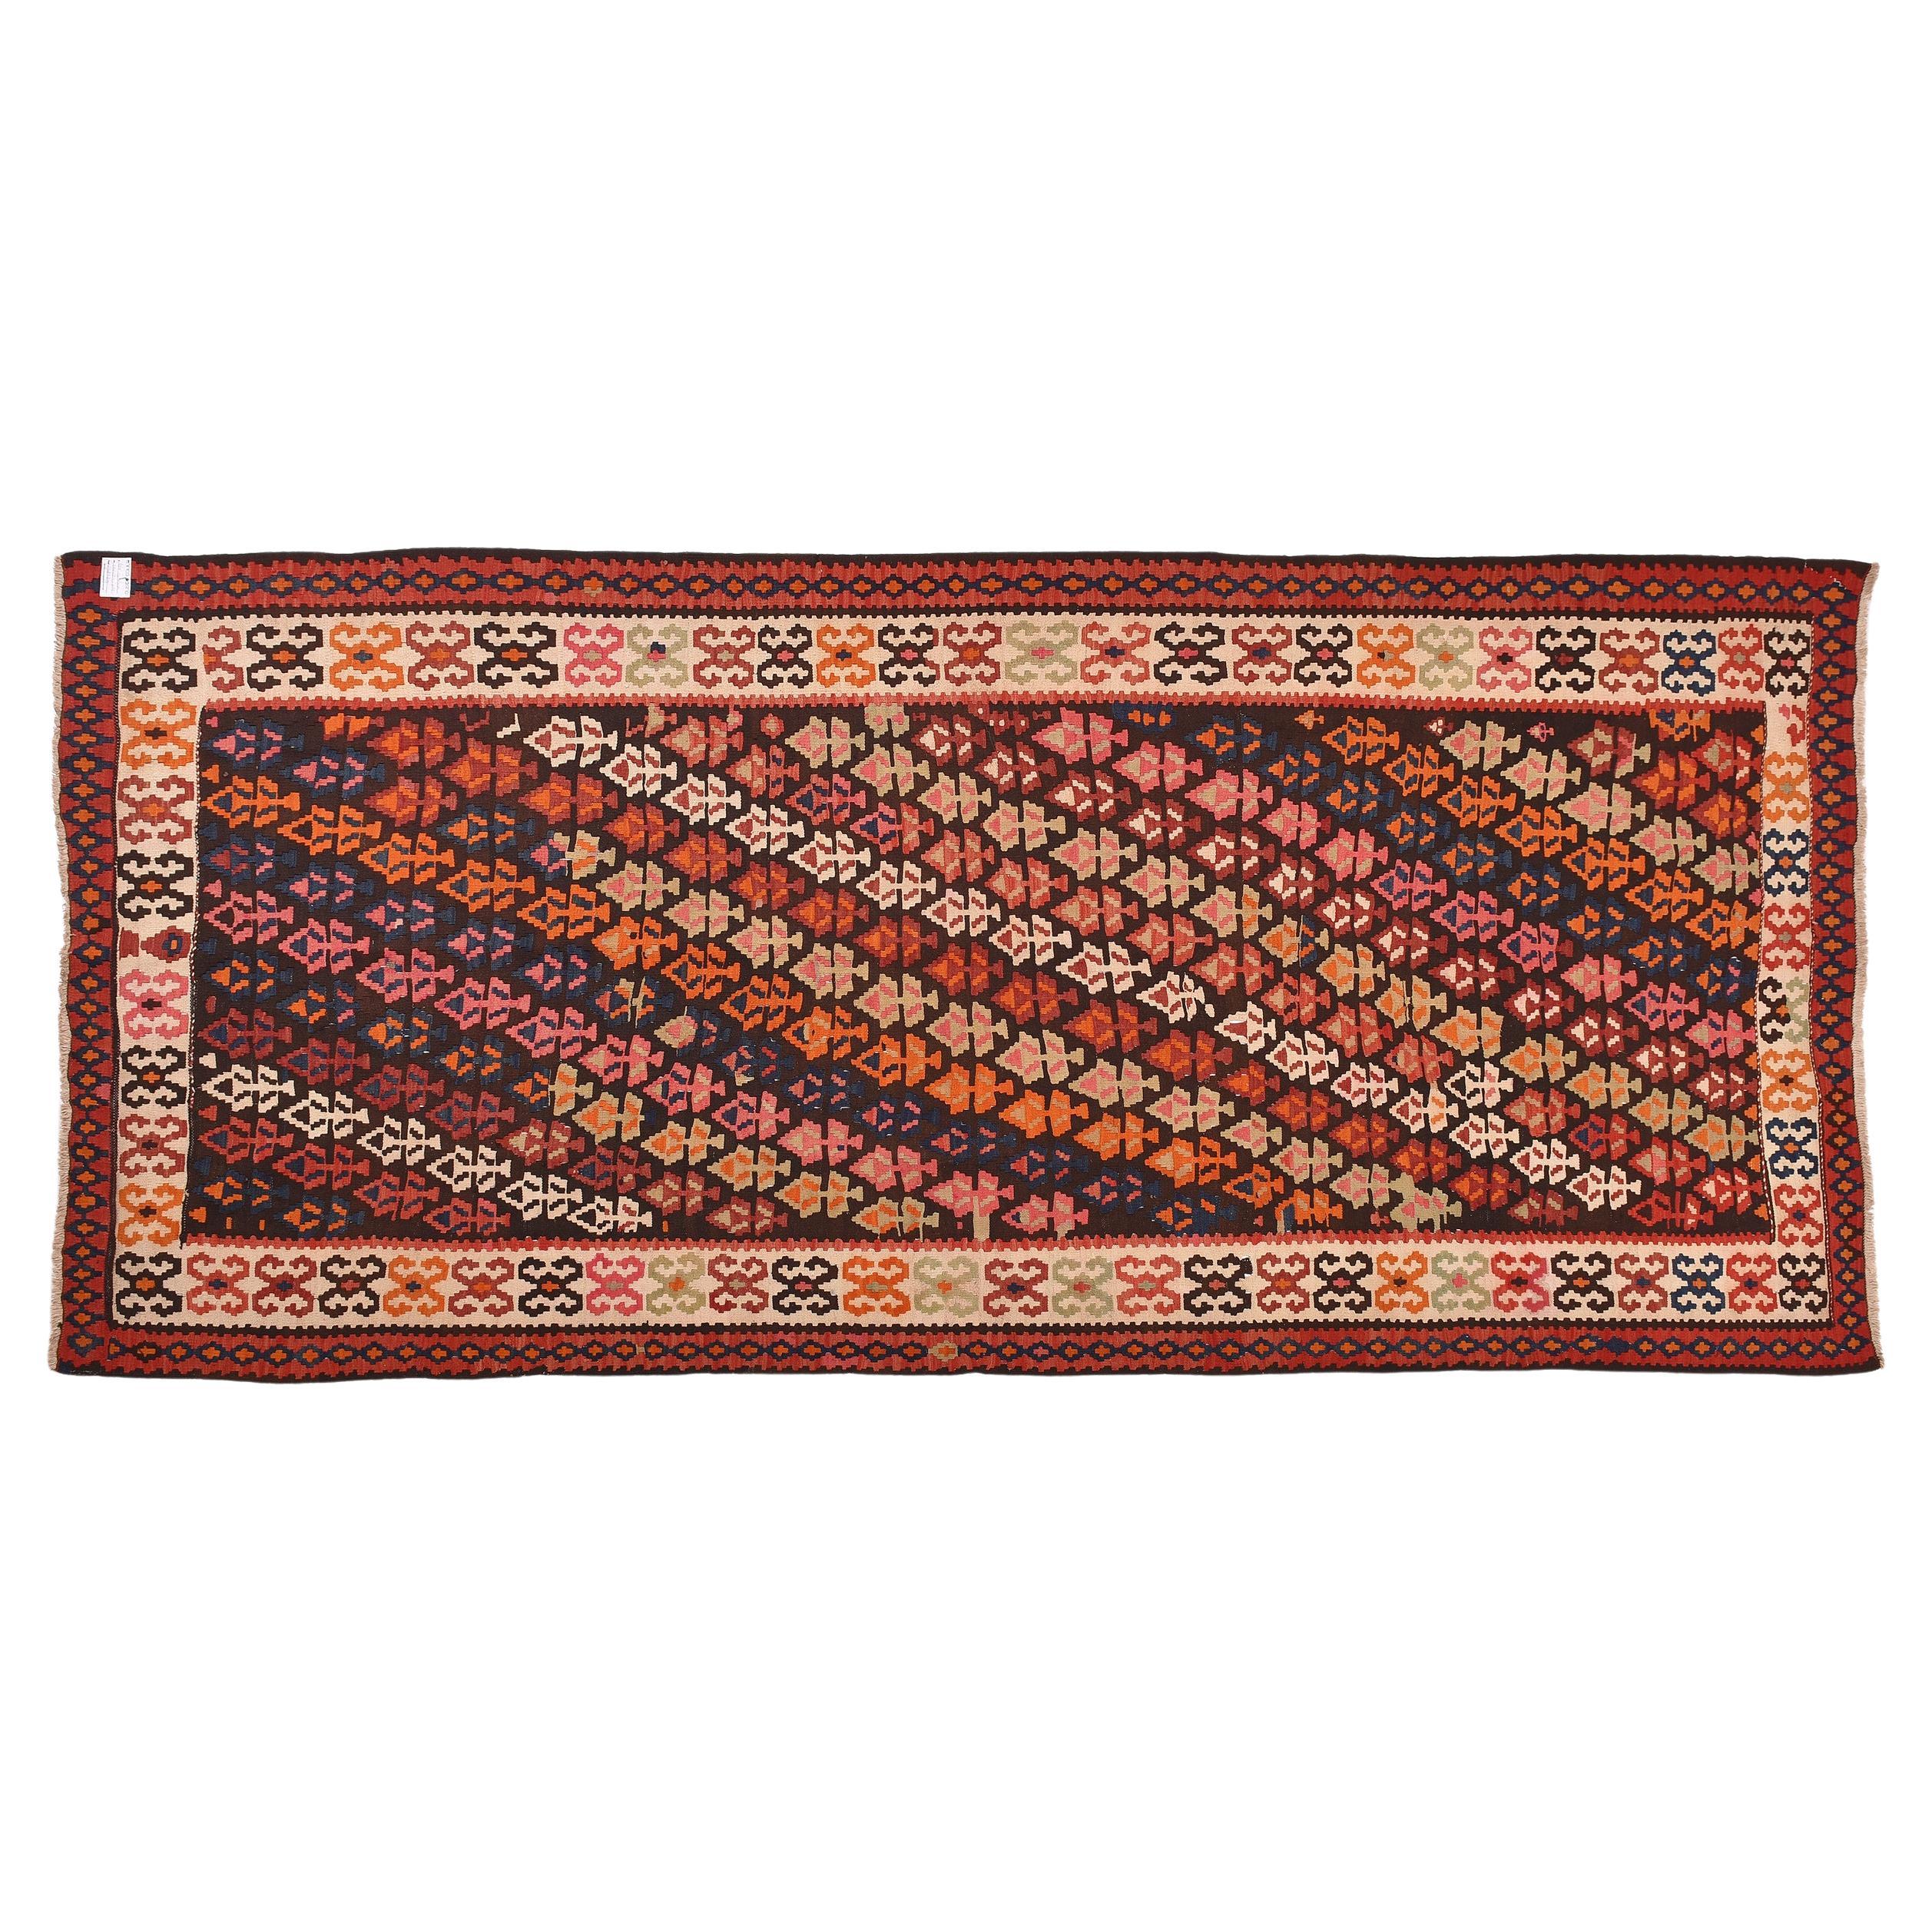 nr. 555 - Very pleasant and robust oriental kilim.  The diagonal design, uncommon and accurate, demonstrates the skill of the weaver.  Excellent quality wool. Can be set anywhere.